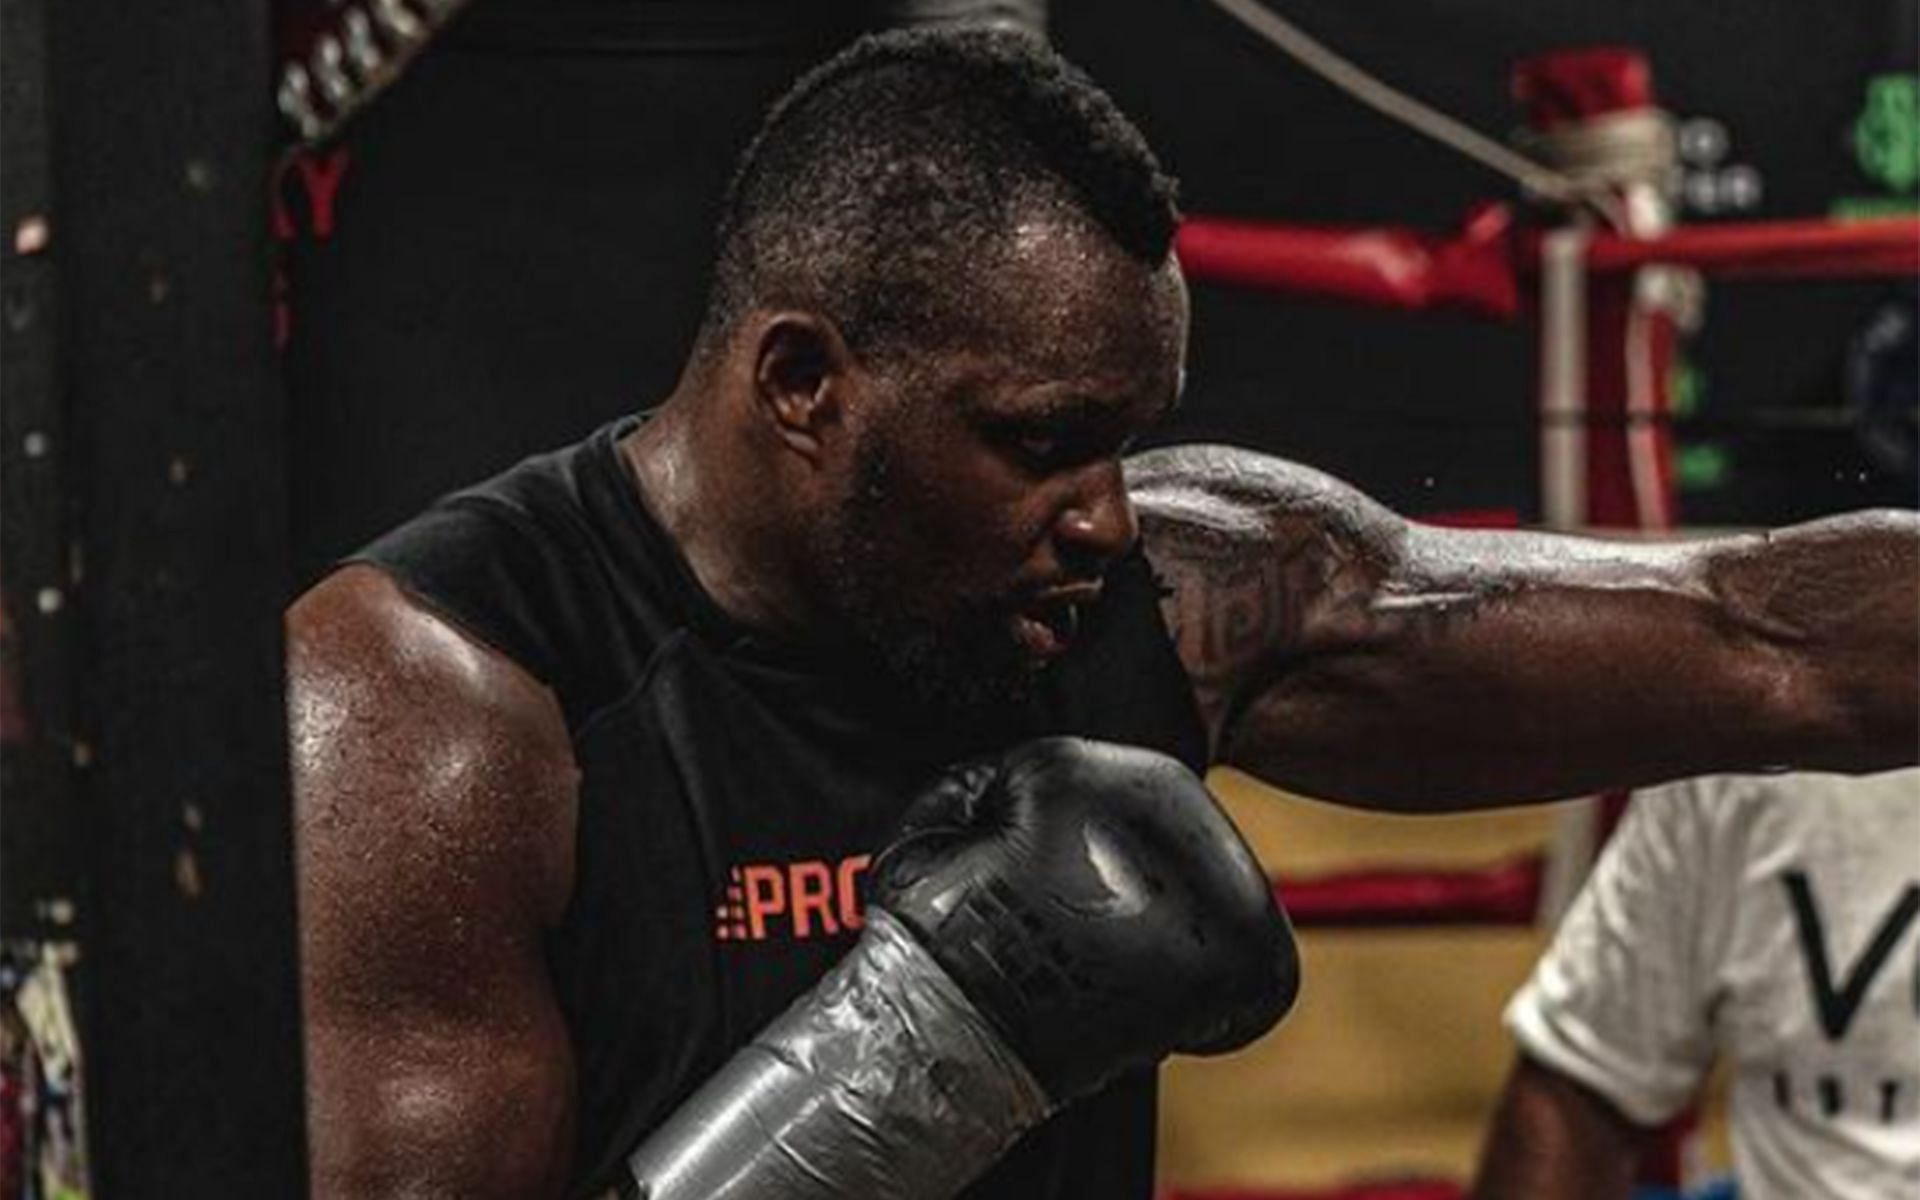 Dillian Whyte will return to boxing on March 17 [Image Courtesy: @dillianwhyte Instagram]